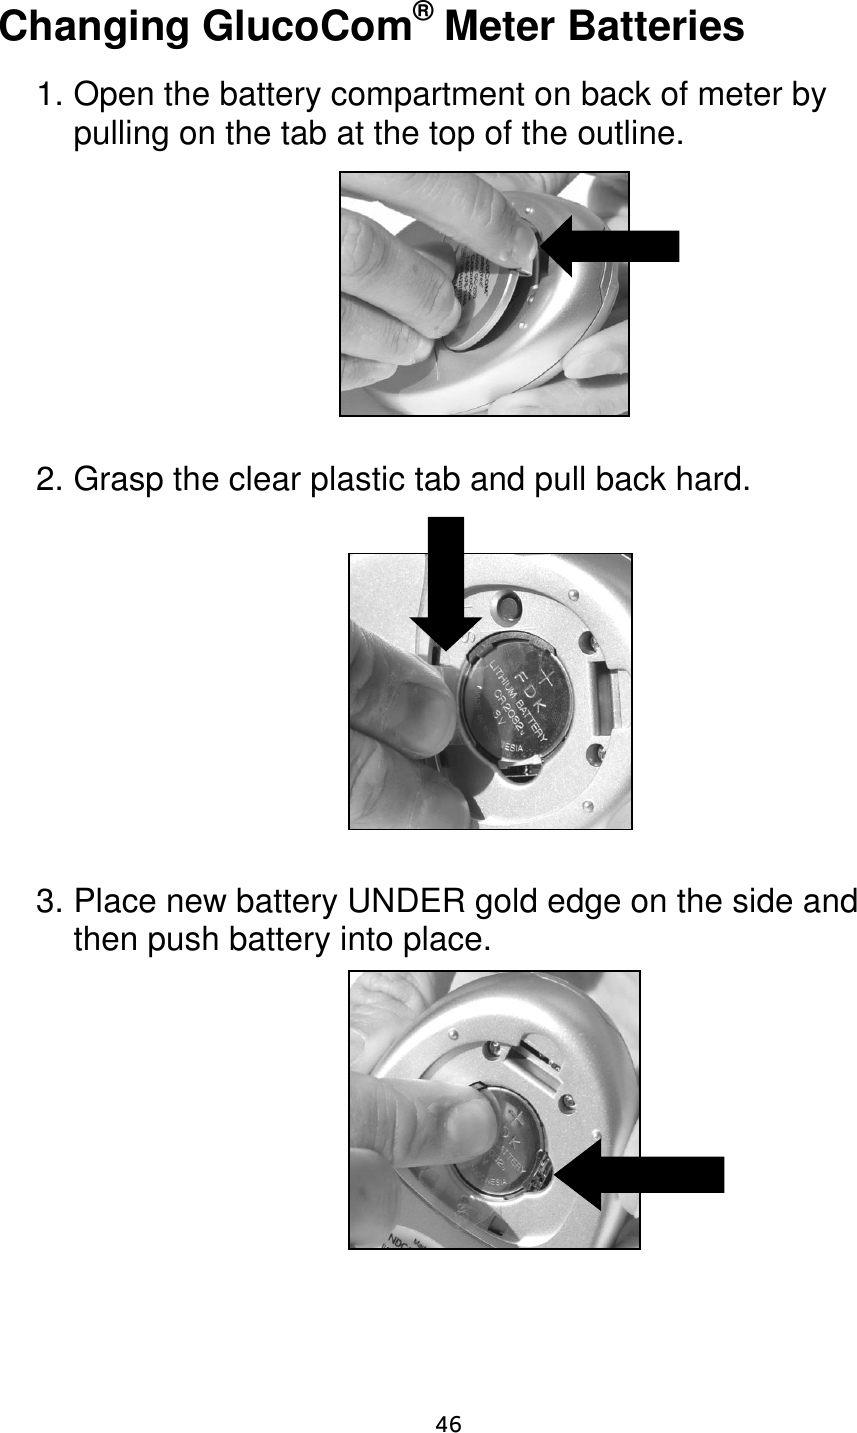                      46 Changing GlucoCom® Meter Batteries  1. Open the battery compartment on back of meter by pulling on the tab at the top of the outline.         2. Grasp the clear plastic tab and pull back hard.            3. Place new battery UNDER gold edge on the side and then push battery into place.          